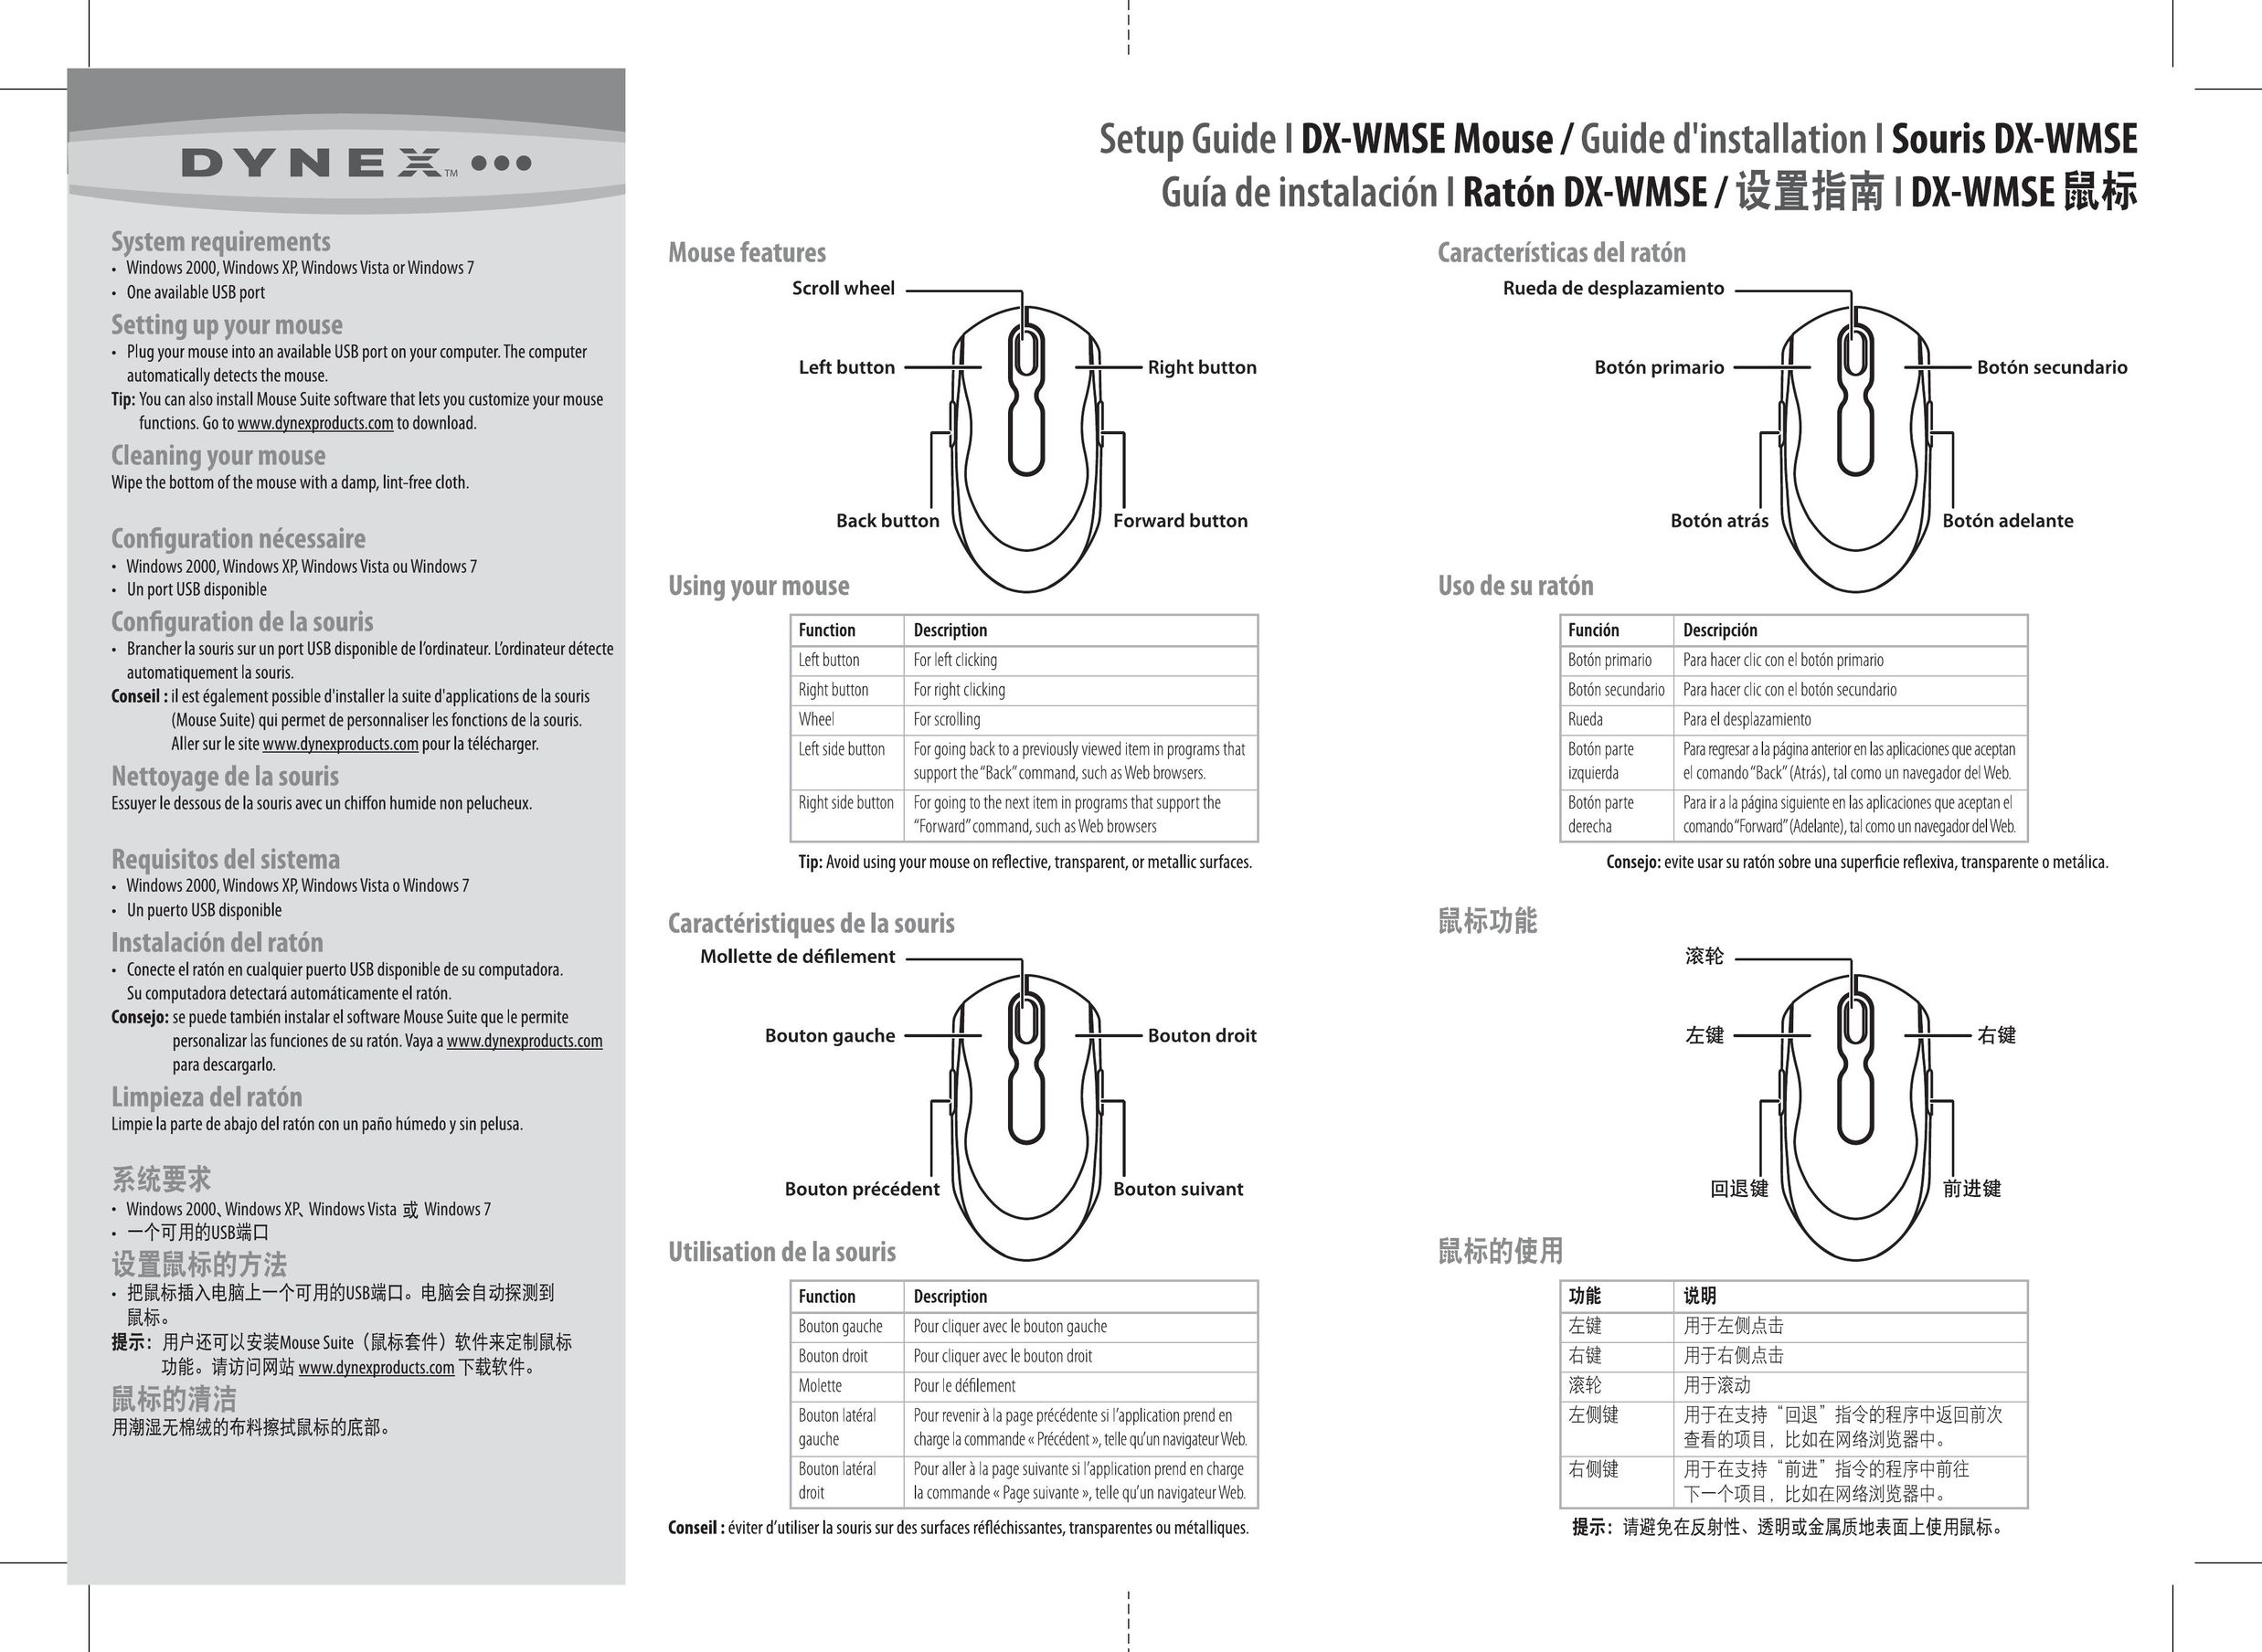 Dynex DX-WMSE Mouse User Manual